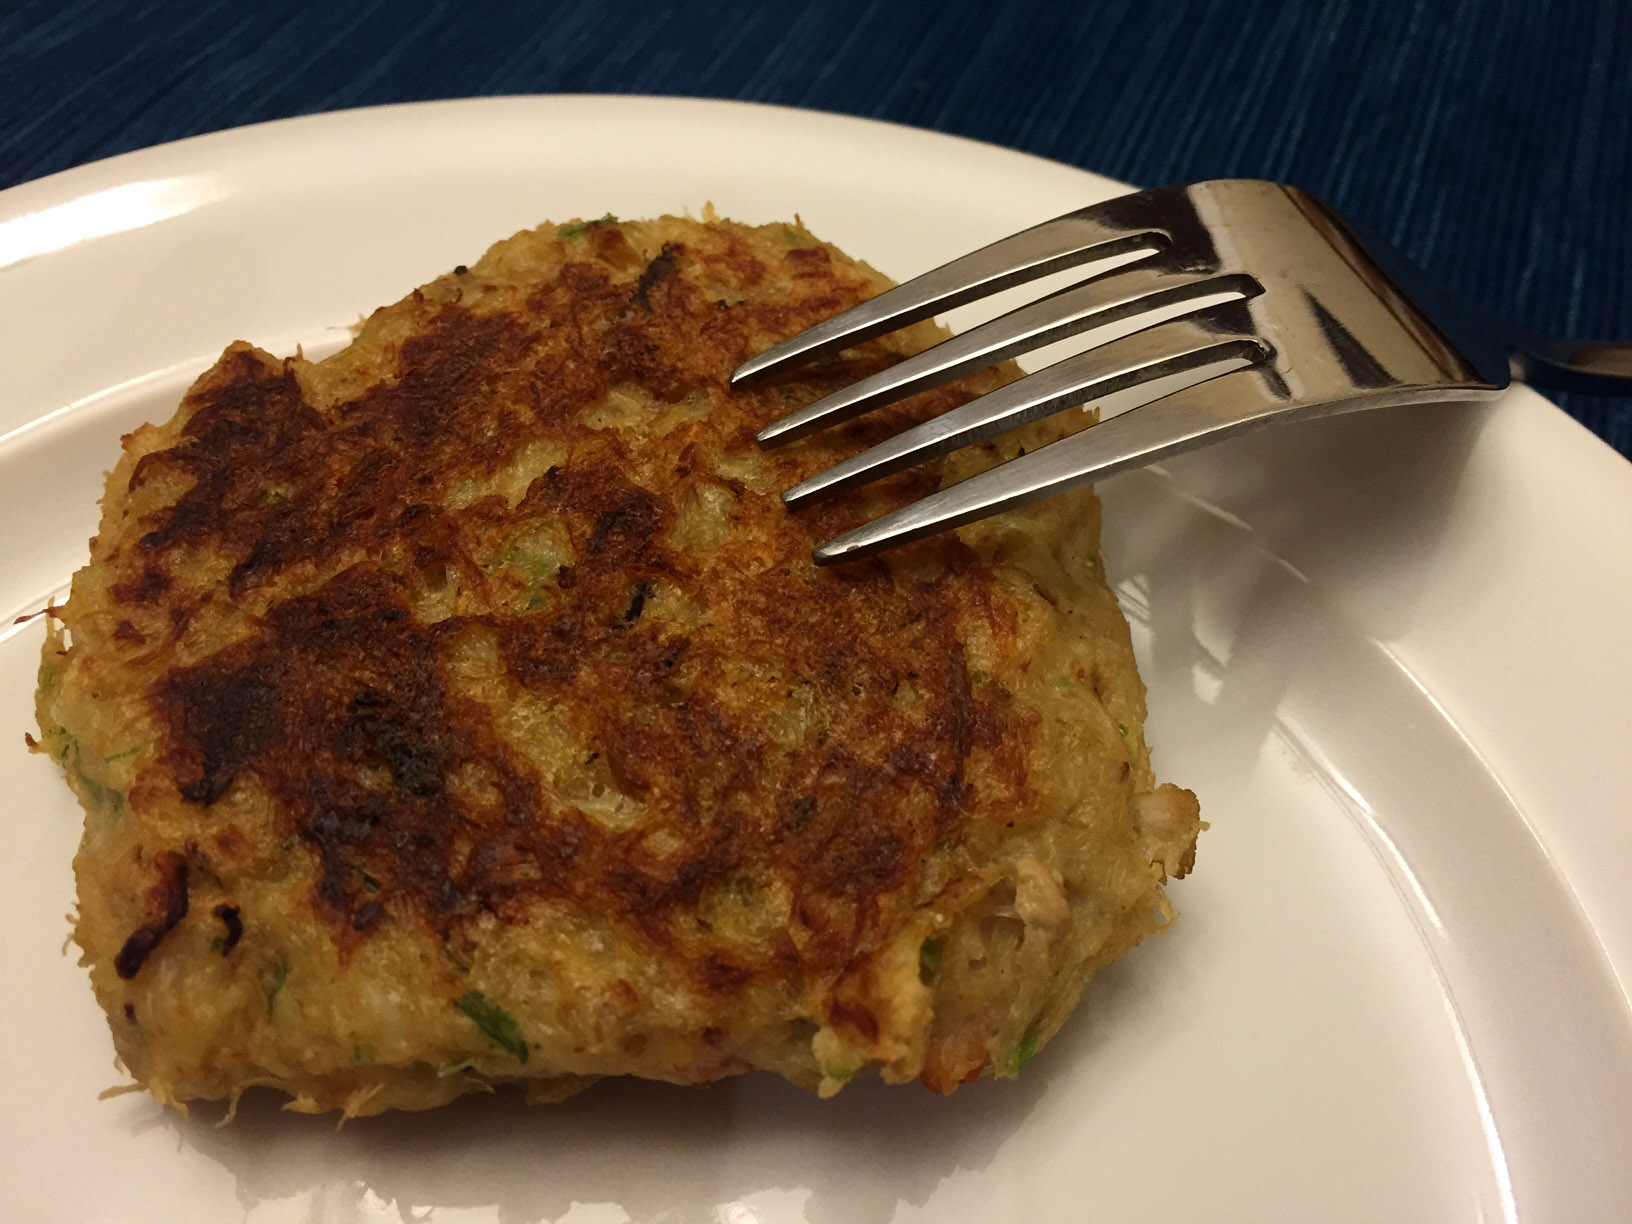 How To Make Crab Cakes That Don’t Fall Apart – Easy Recipe